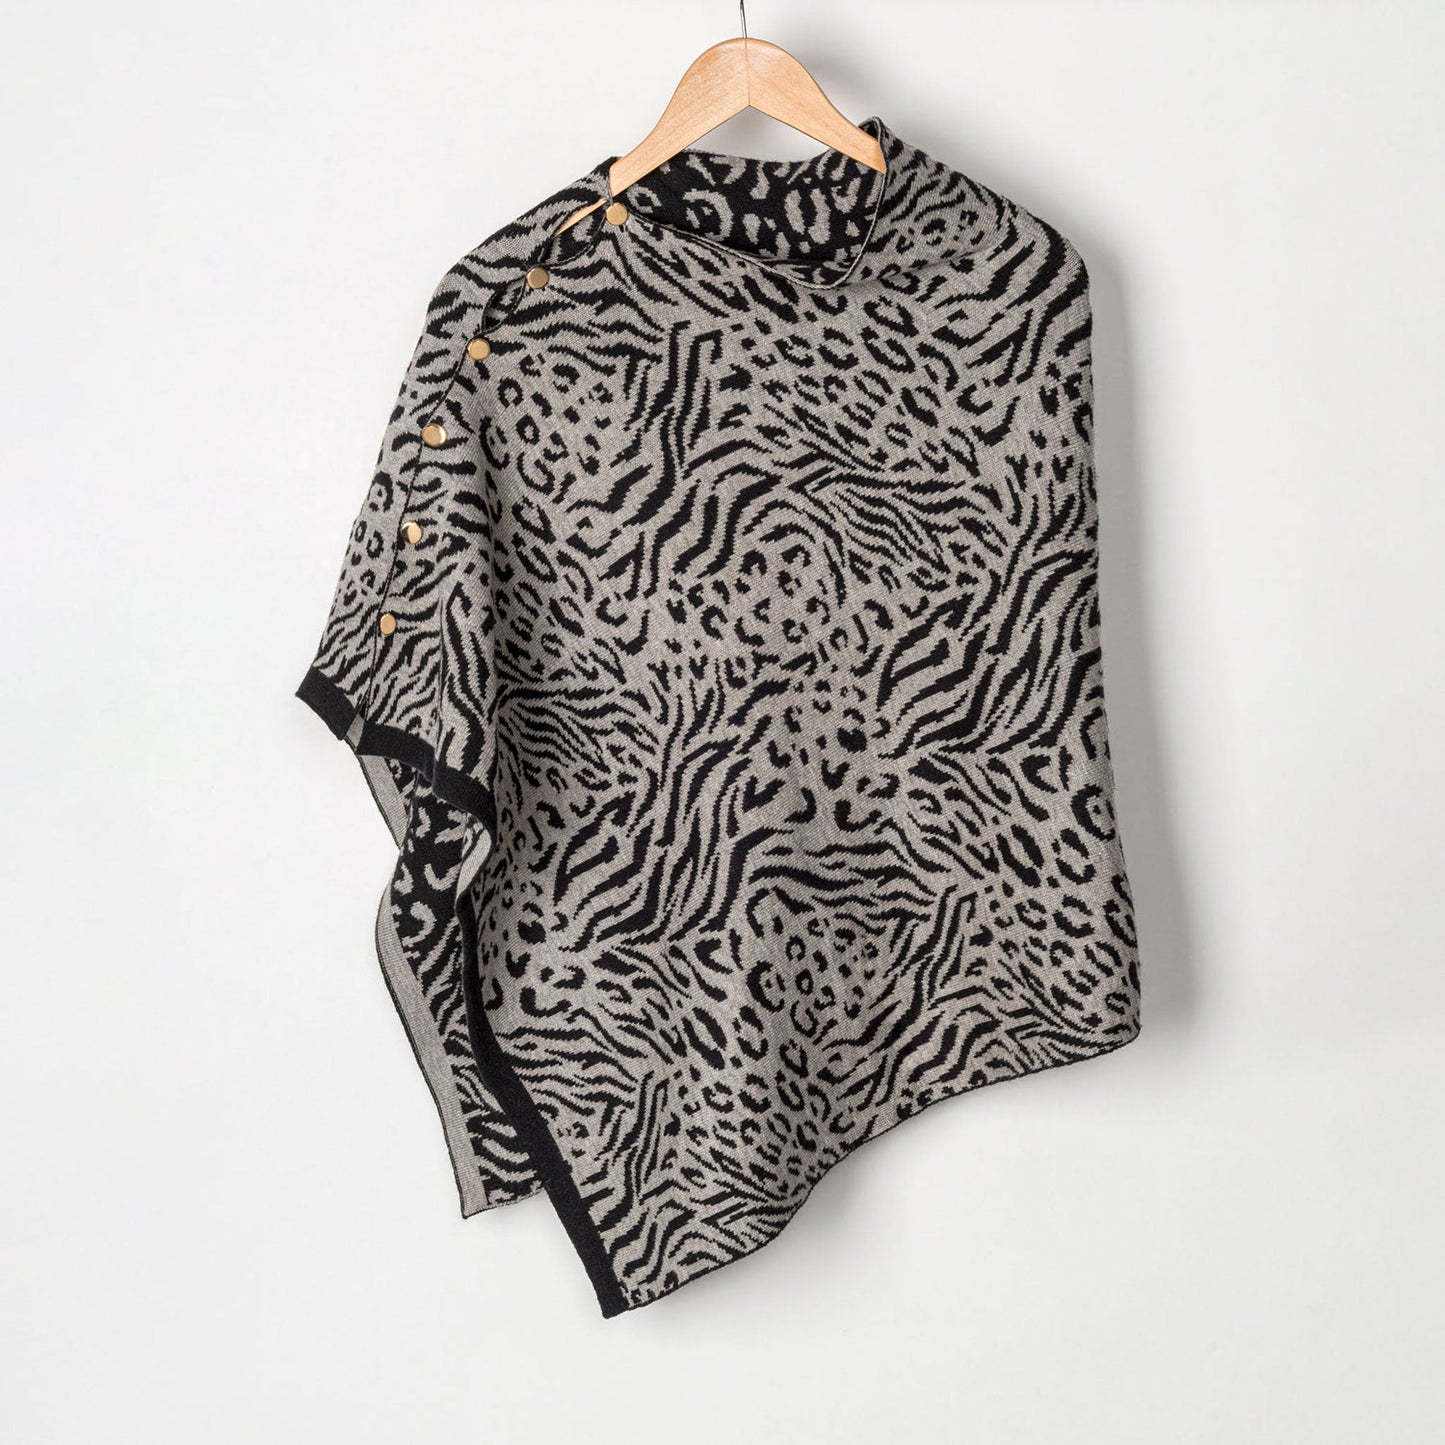 Black Animal Print Reversible Poncho With Gold Button Accents - Os